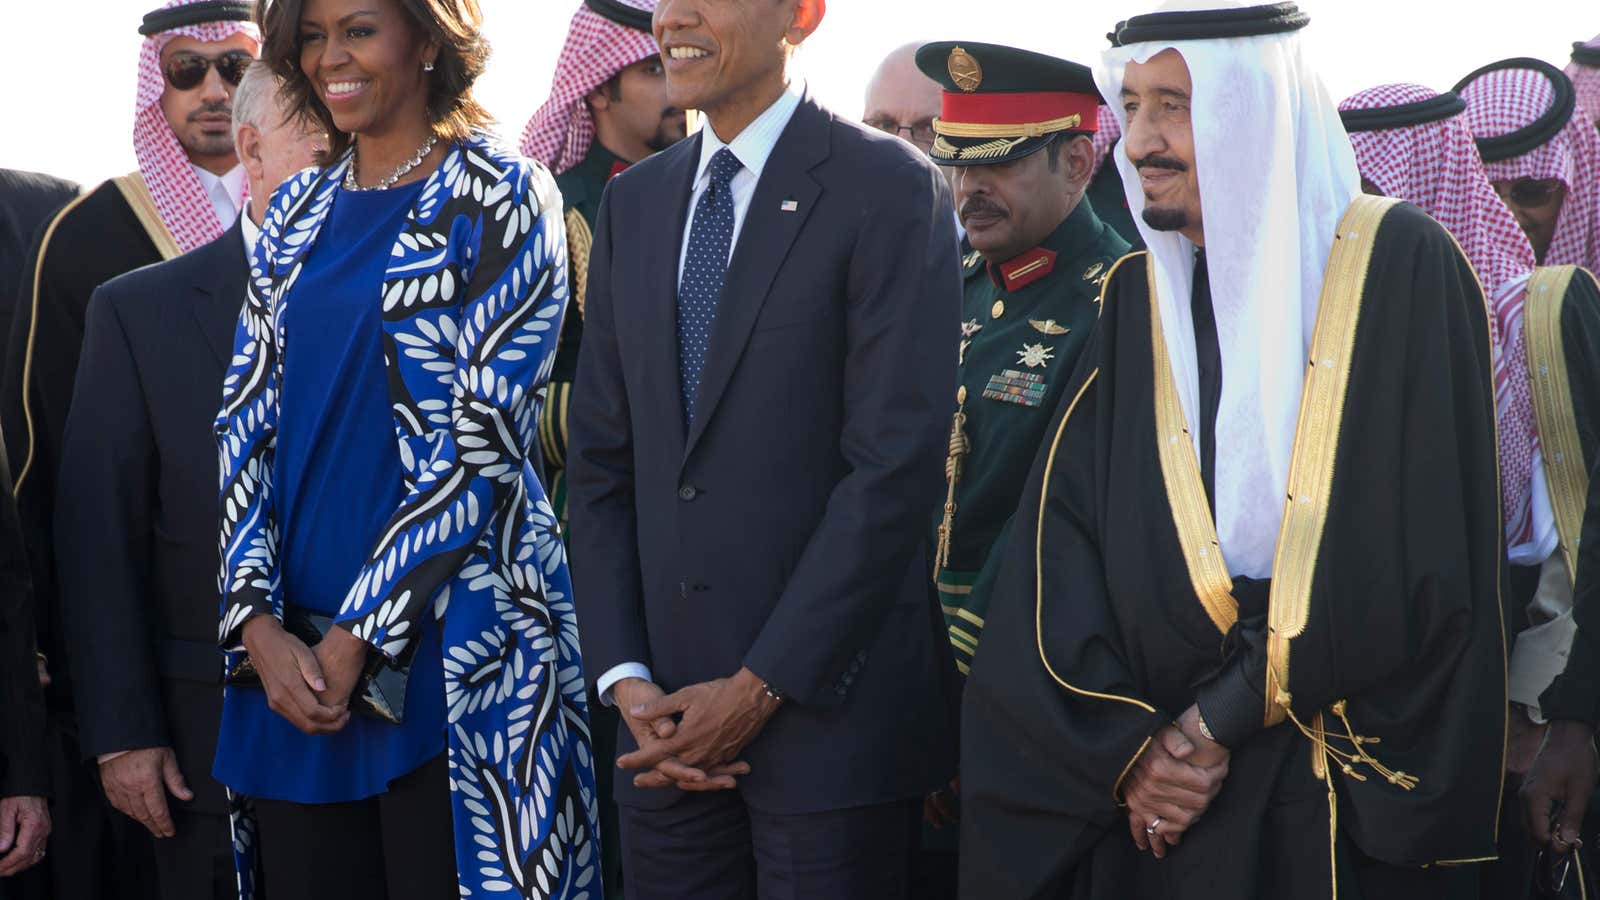 President Barack Obama and first lady Michelle Obama stand with new Saudi King Salman bin Abdul Aziz, heads uncovered.